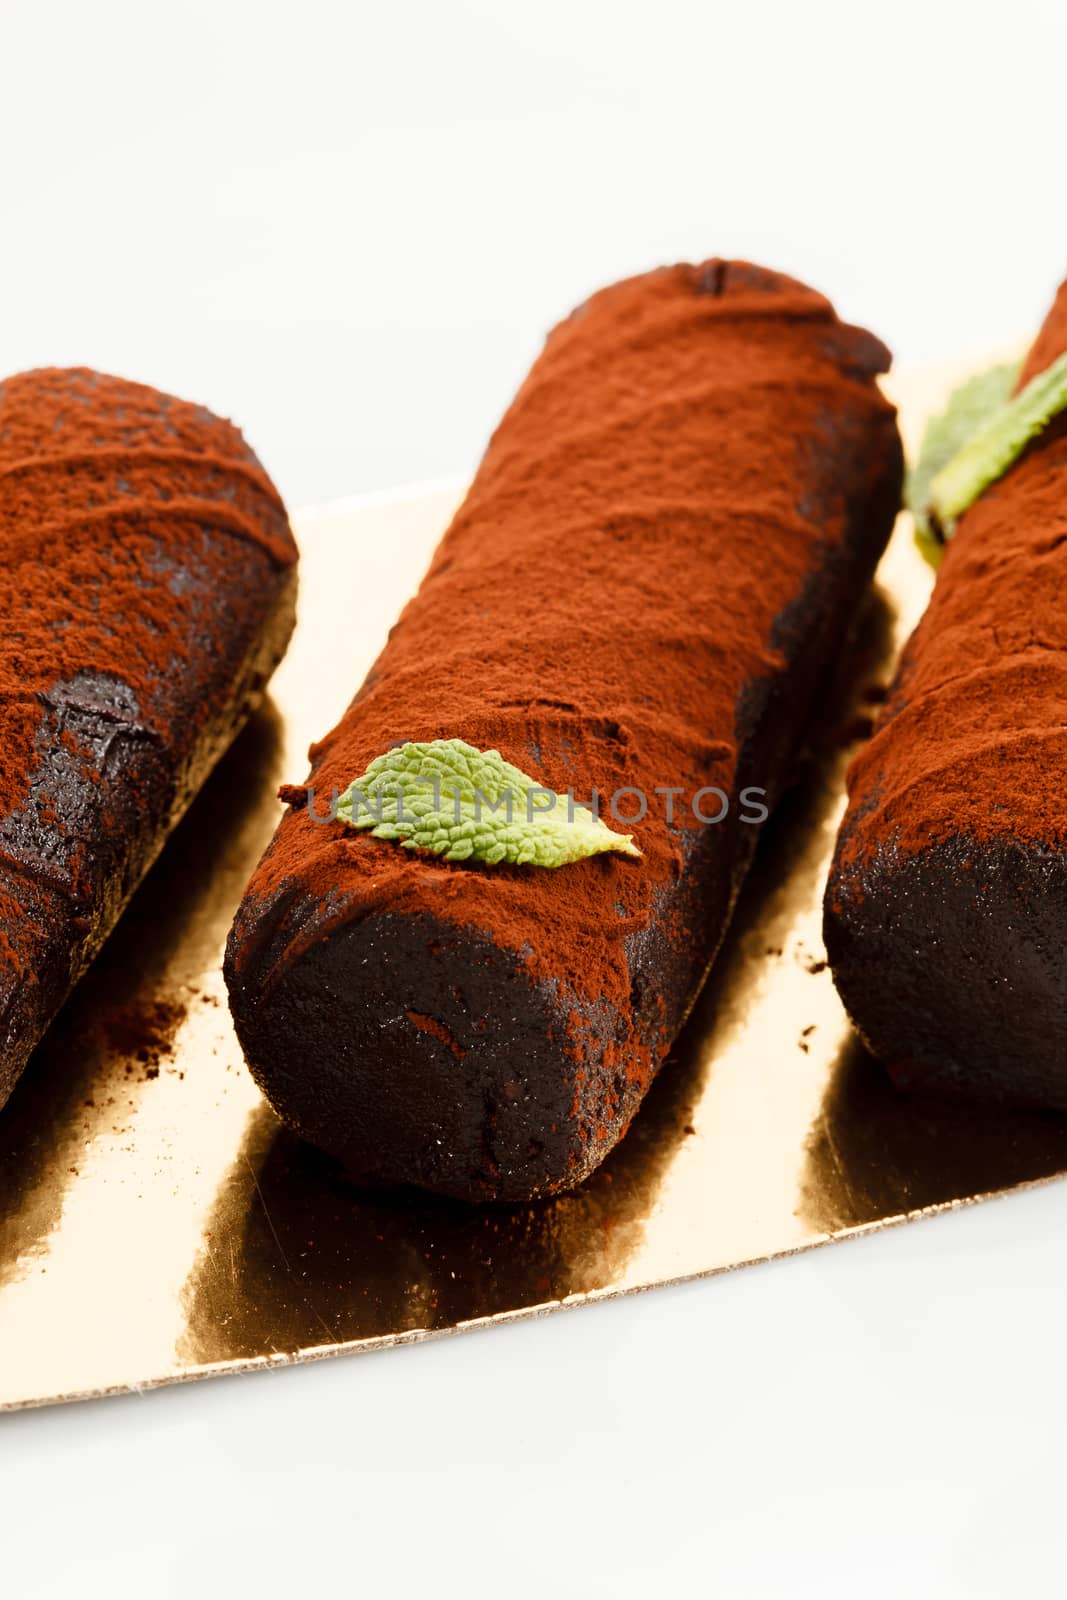 chocolate pastry by shebeko